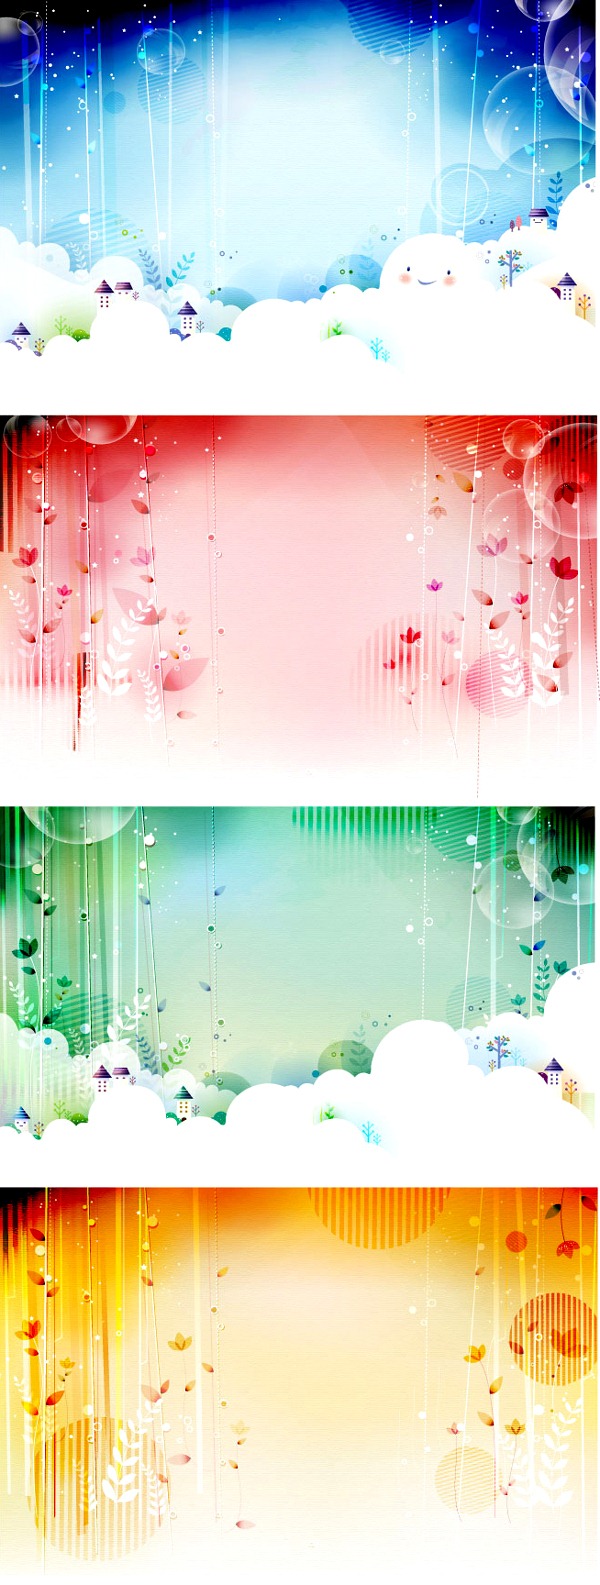 Fairy Tales Fantasy Background Vector Material My Photoshop